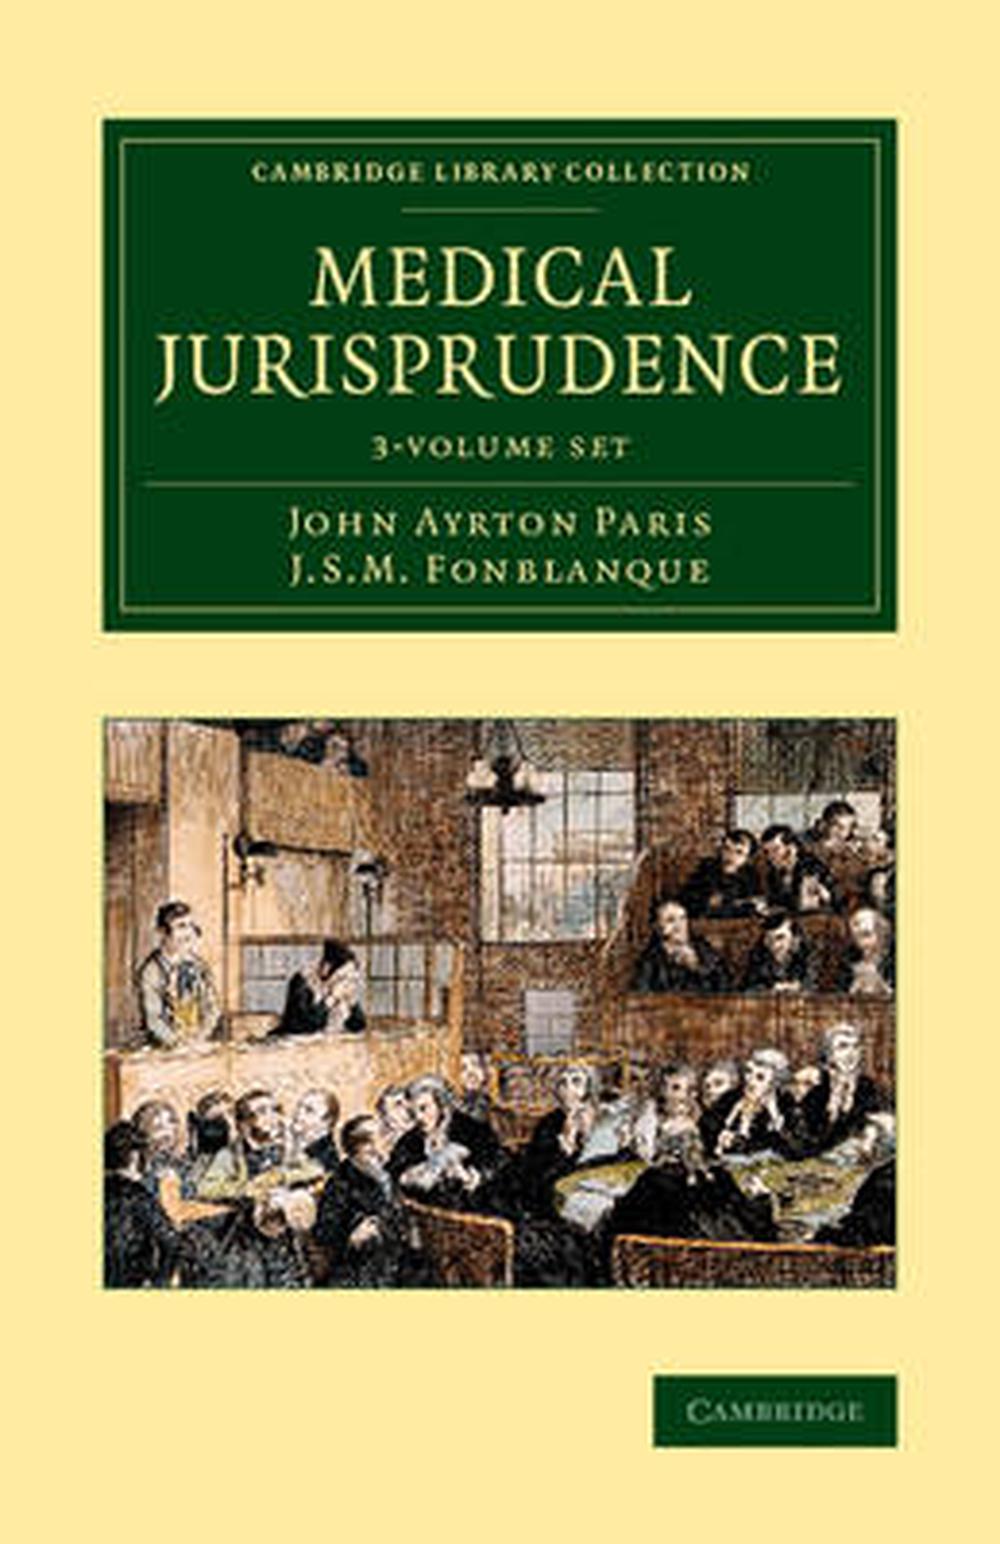 case study related to medical jurisprudence